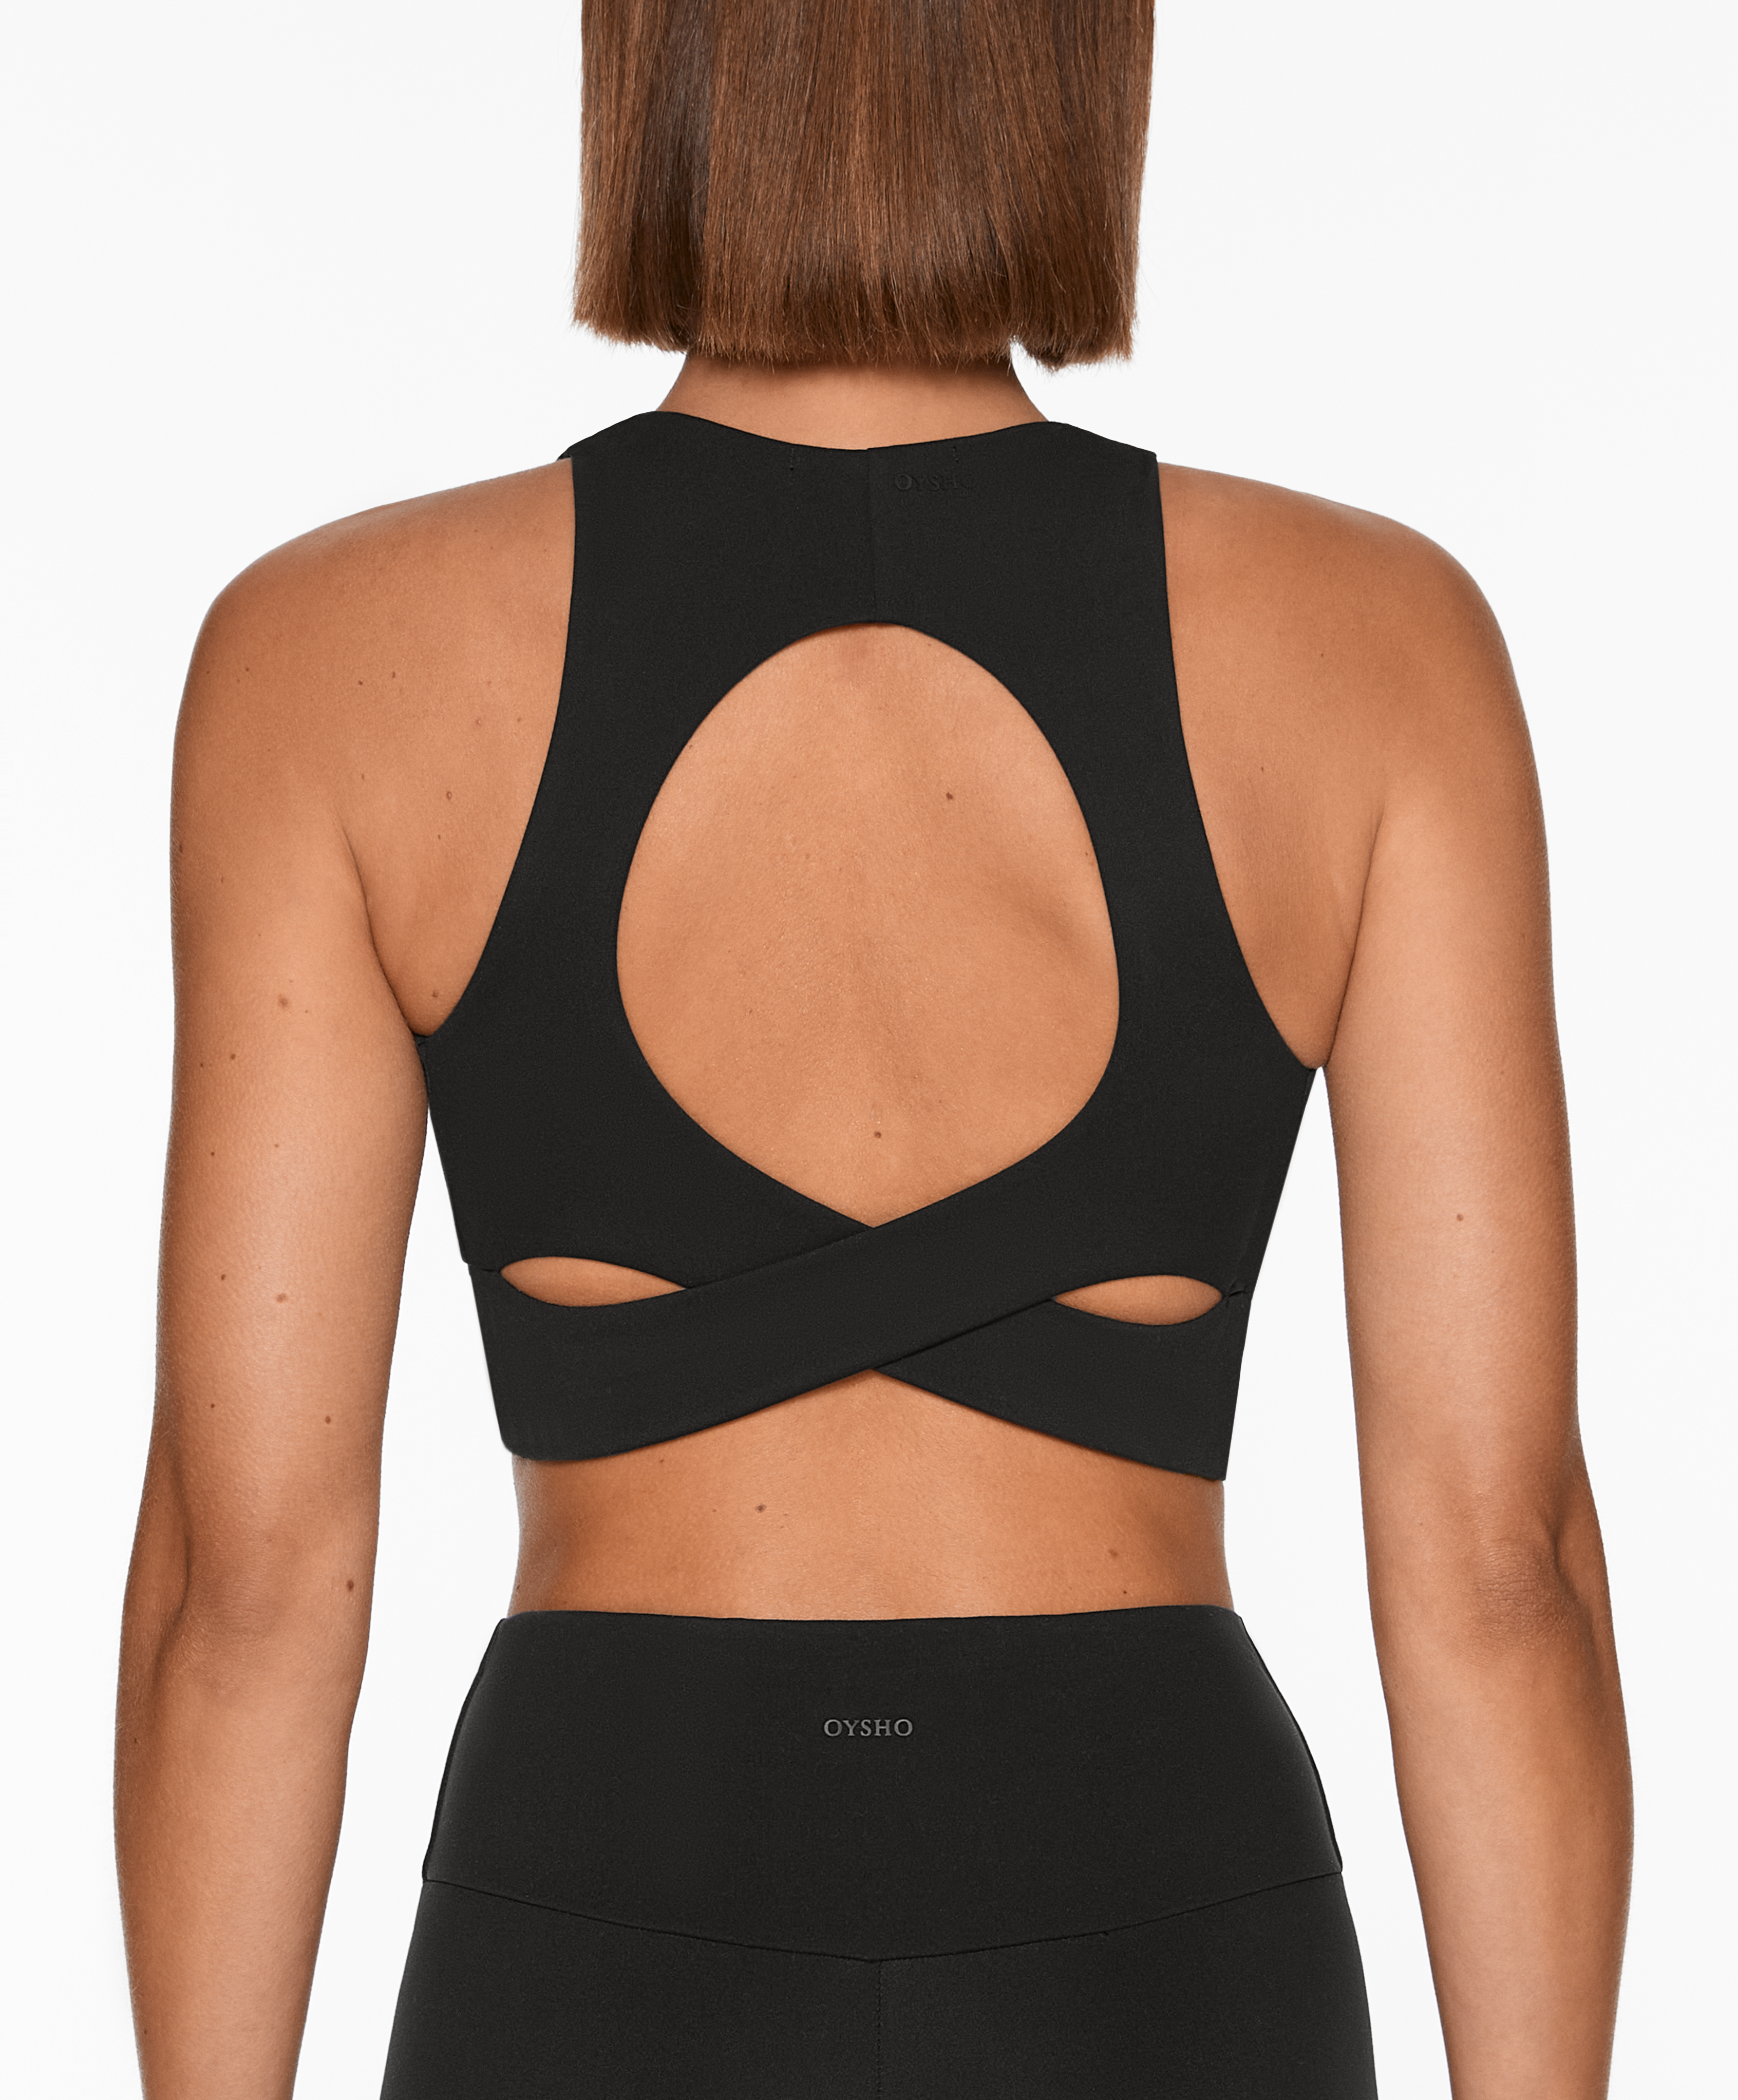 Medium-support Comfortlux sports bra with cups